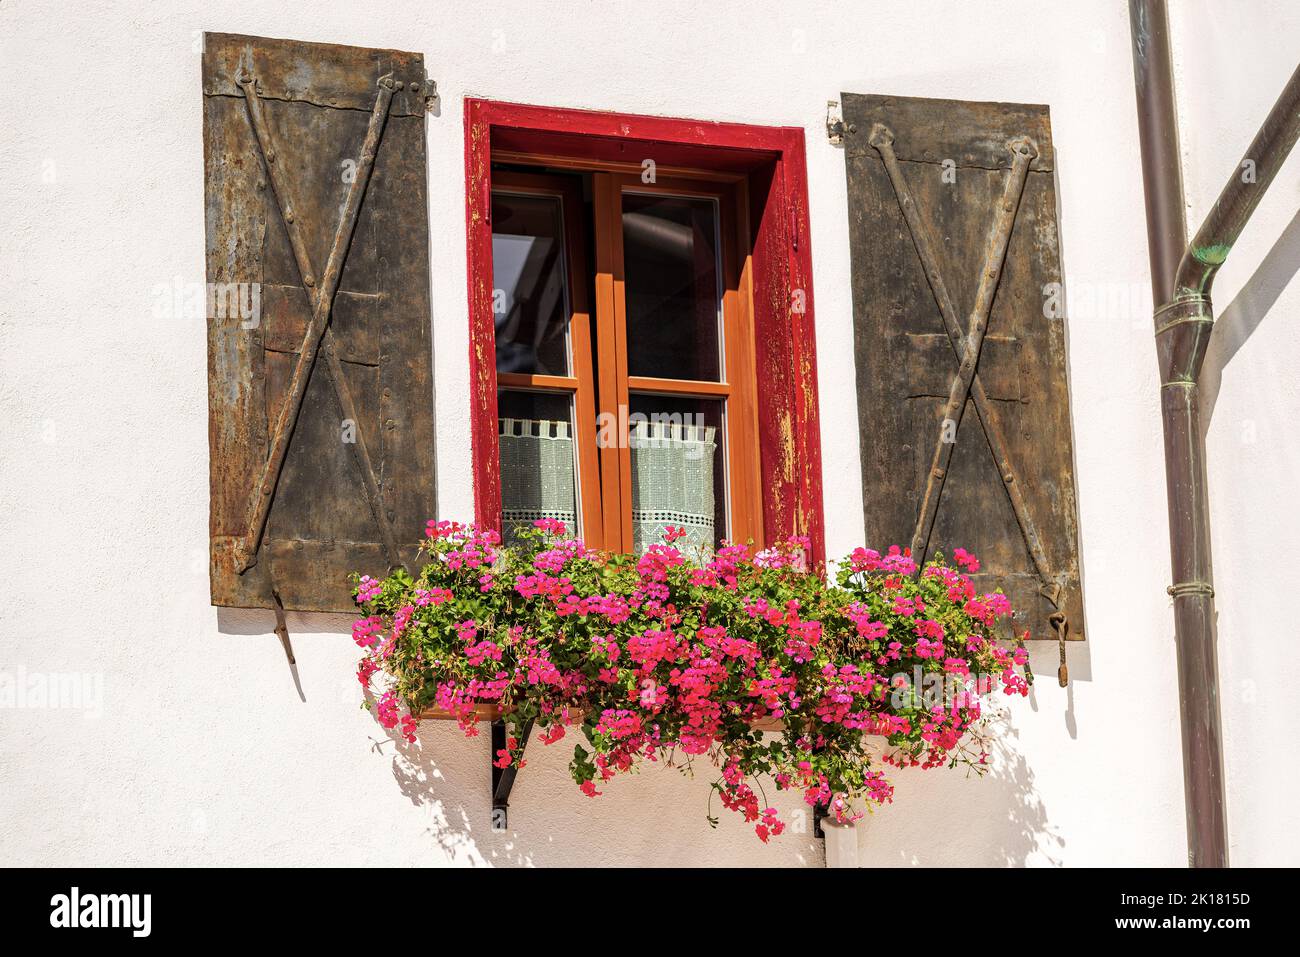 Ancient window with metal shutters and red geranium flowers. Small village of Malborghetto-Valbruna in Val Canale, Udine, Friuli-Venezia Giulia, Italy Stock Photo